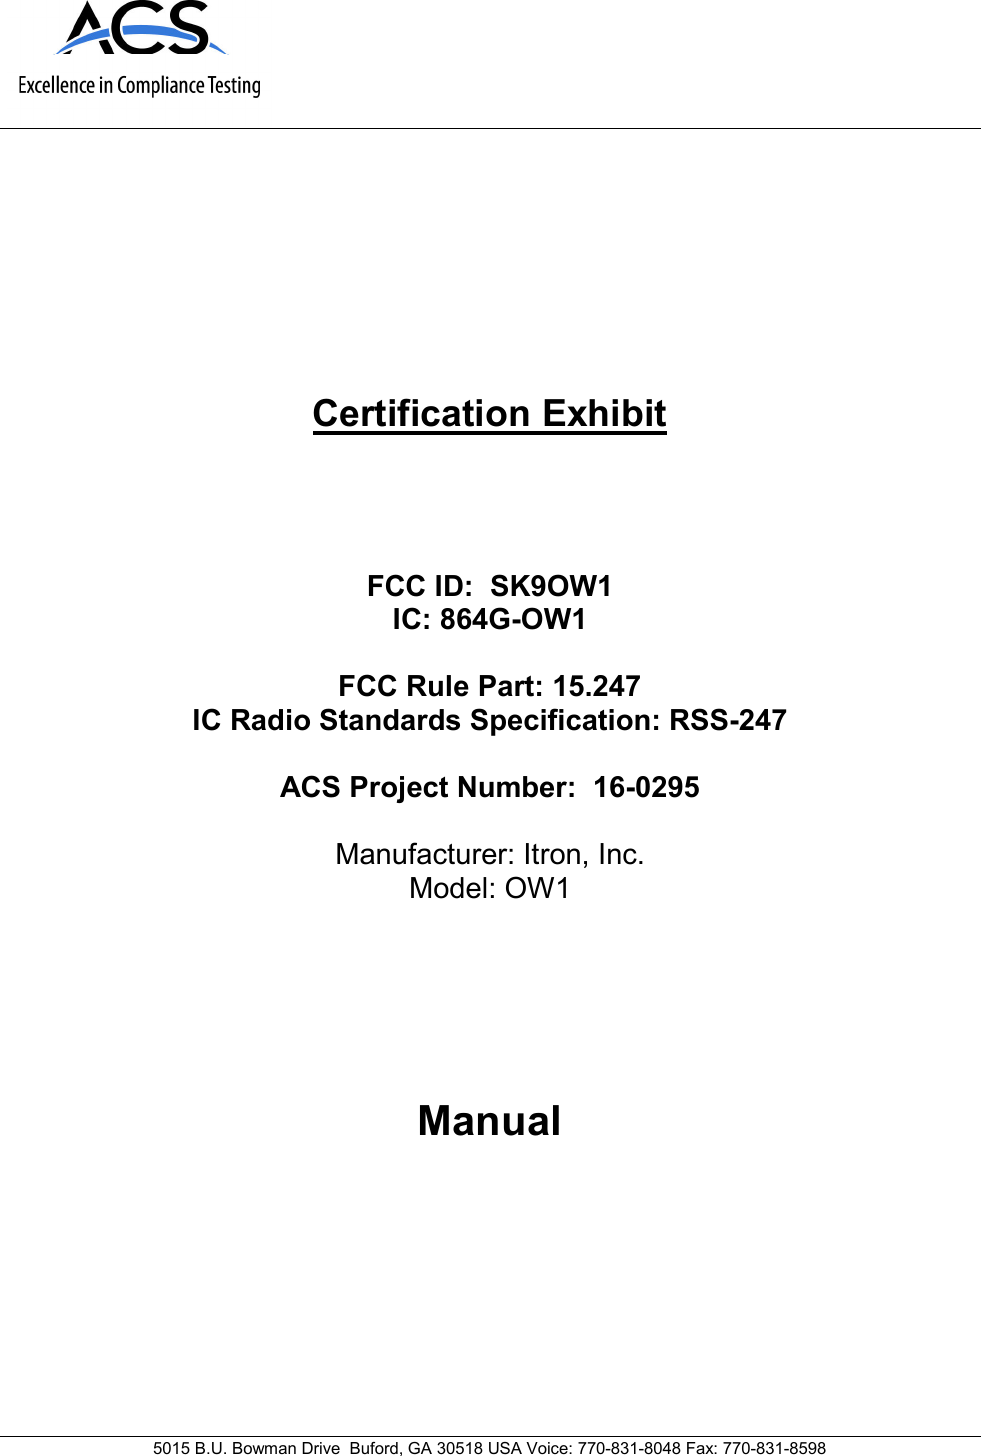      5015 B.U. Bowman Drive  Buford, GA 30518 USA Voice: 770-831-8048 Fax: 770-831-8598   Certification Exhibit     FCC ID:  SK9OW1 IC: 864G-OW1  FCC Rule Part: 15.247 IC Radio Standards Specification: RSS-247  ACS Project Number:  16-0295   Manufacturer: Itron, Inc. Model: OW1     Manual    